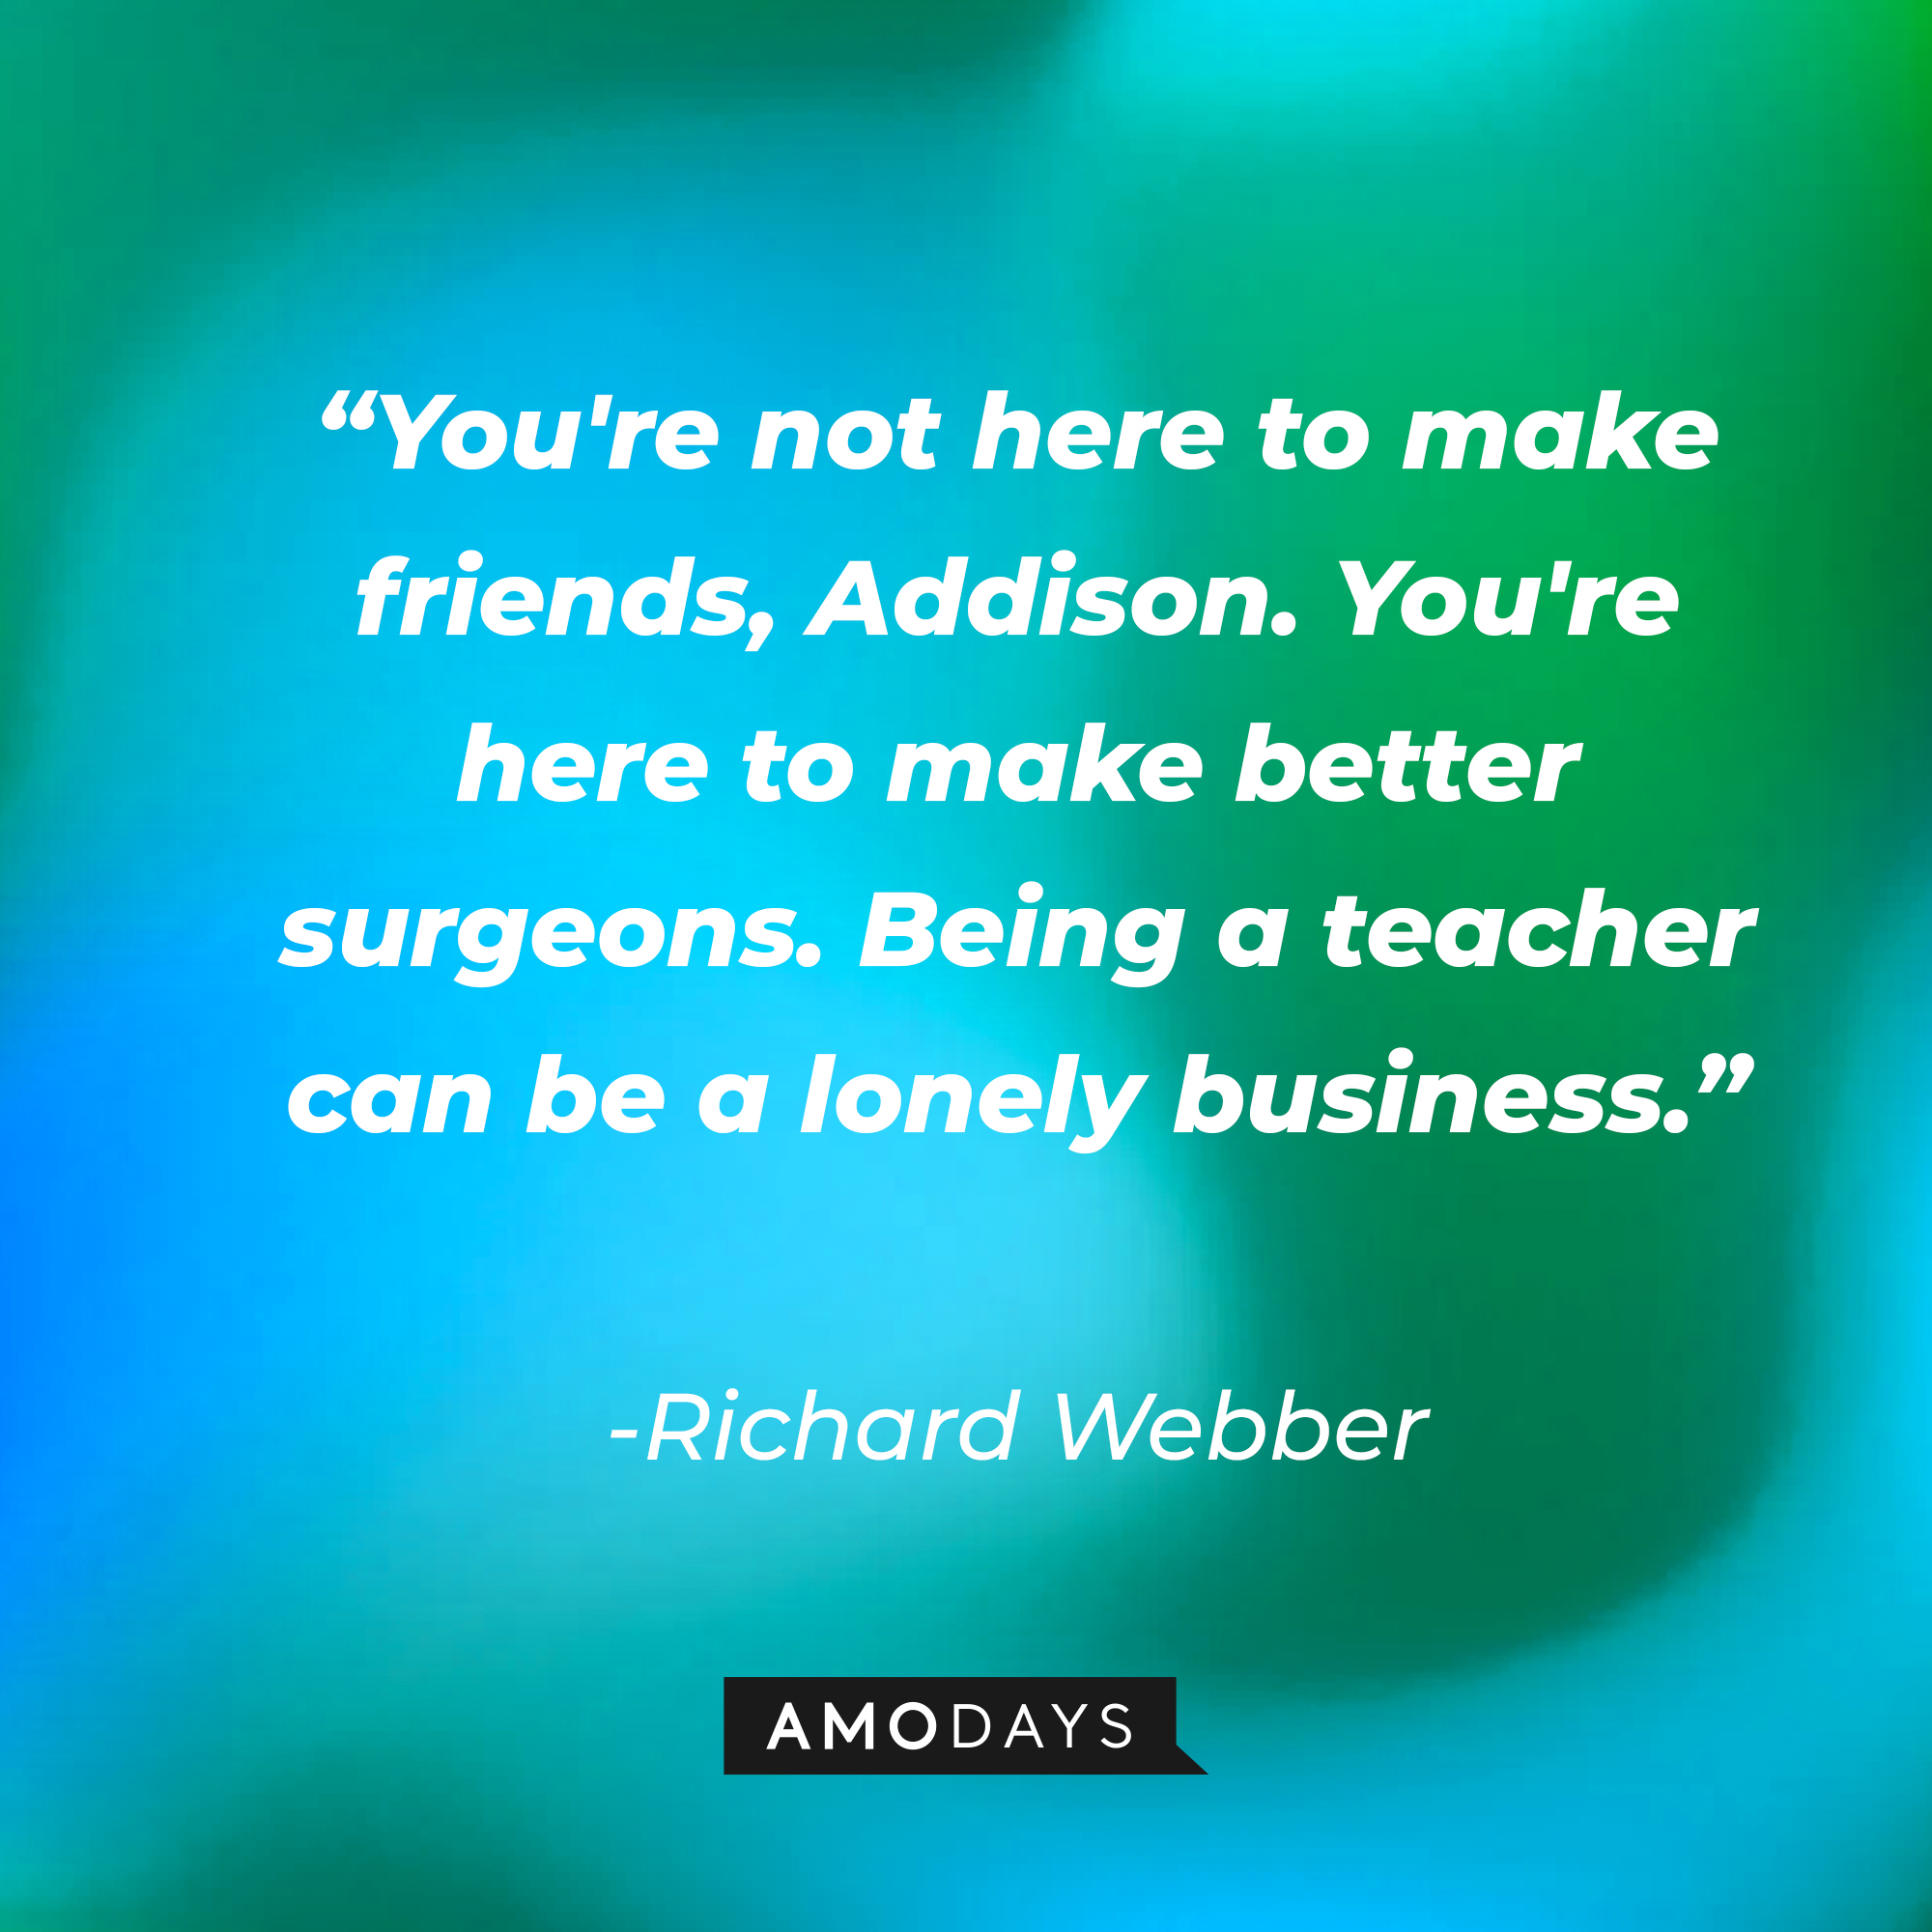 Richard Webber with his quote: "You're not here to make friends, Addison. You're here to make better surgeons. Being a teacher can be a lonely business." | Source: Amodays